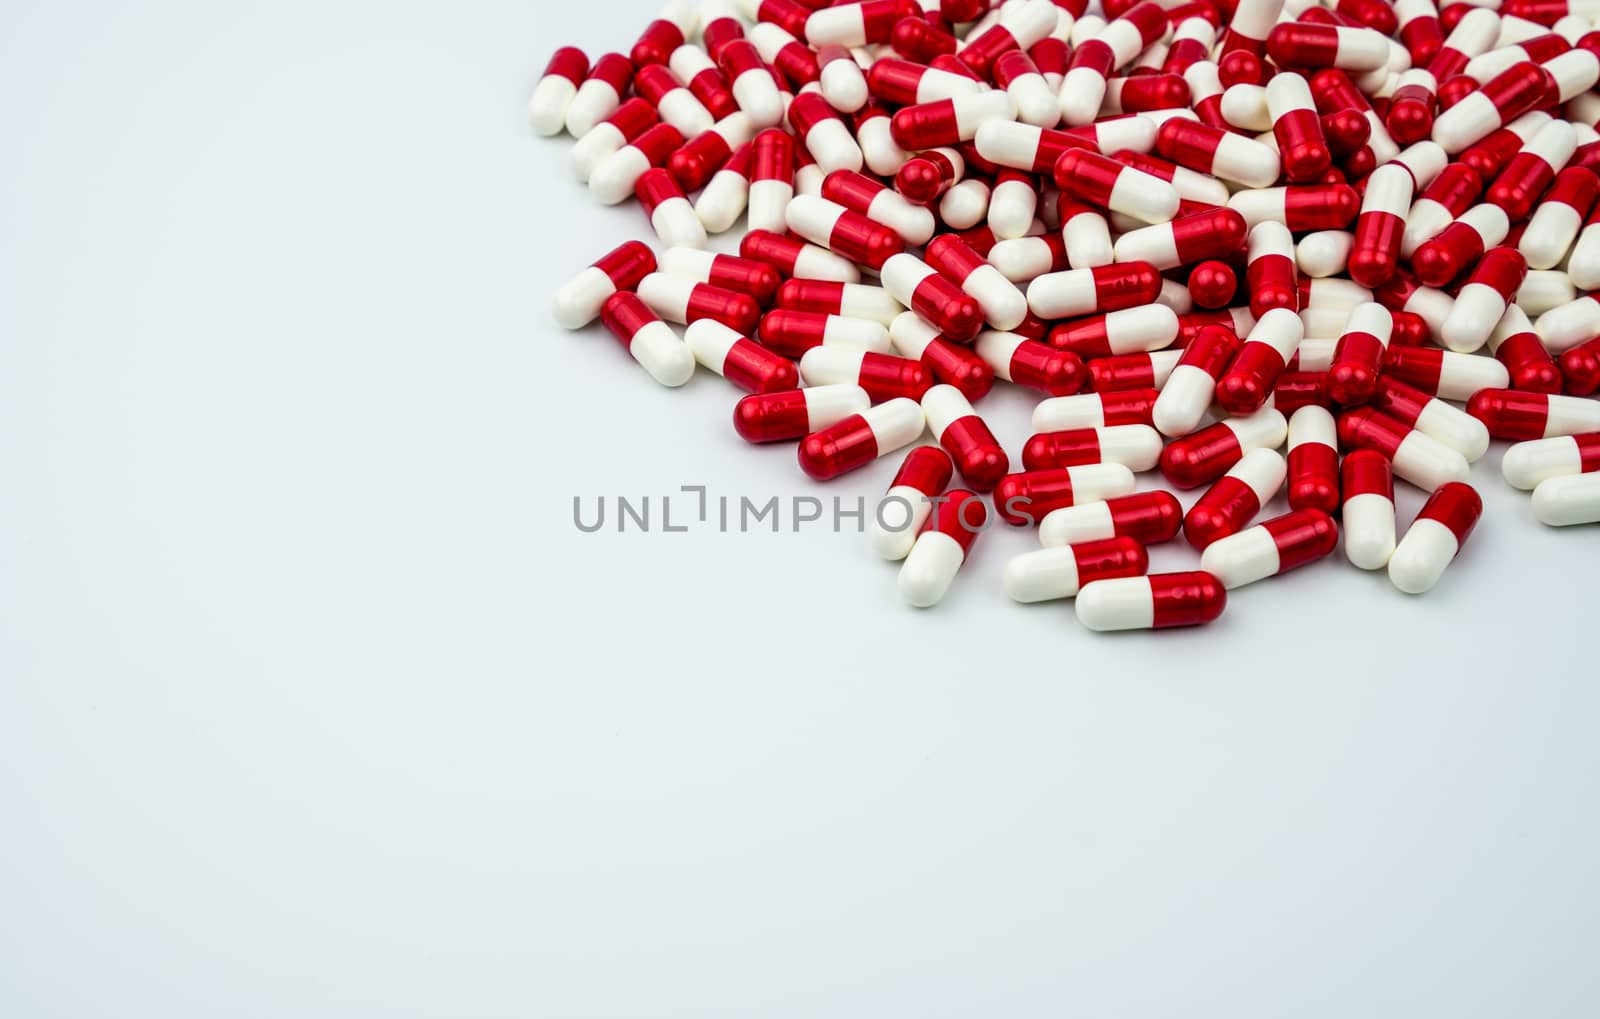 Red, white antibiotic capsules pills on white background with copy space. Drug resistance, antibiotic drug use with reasonable. Antibiotics drug overuse. Pharmaceutical industry. Pharmacy products.